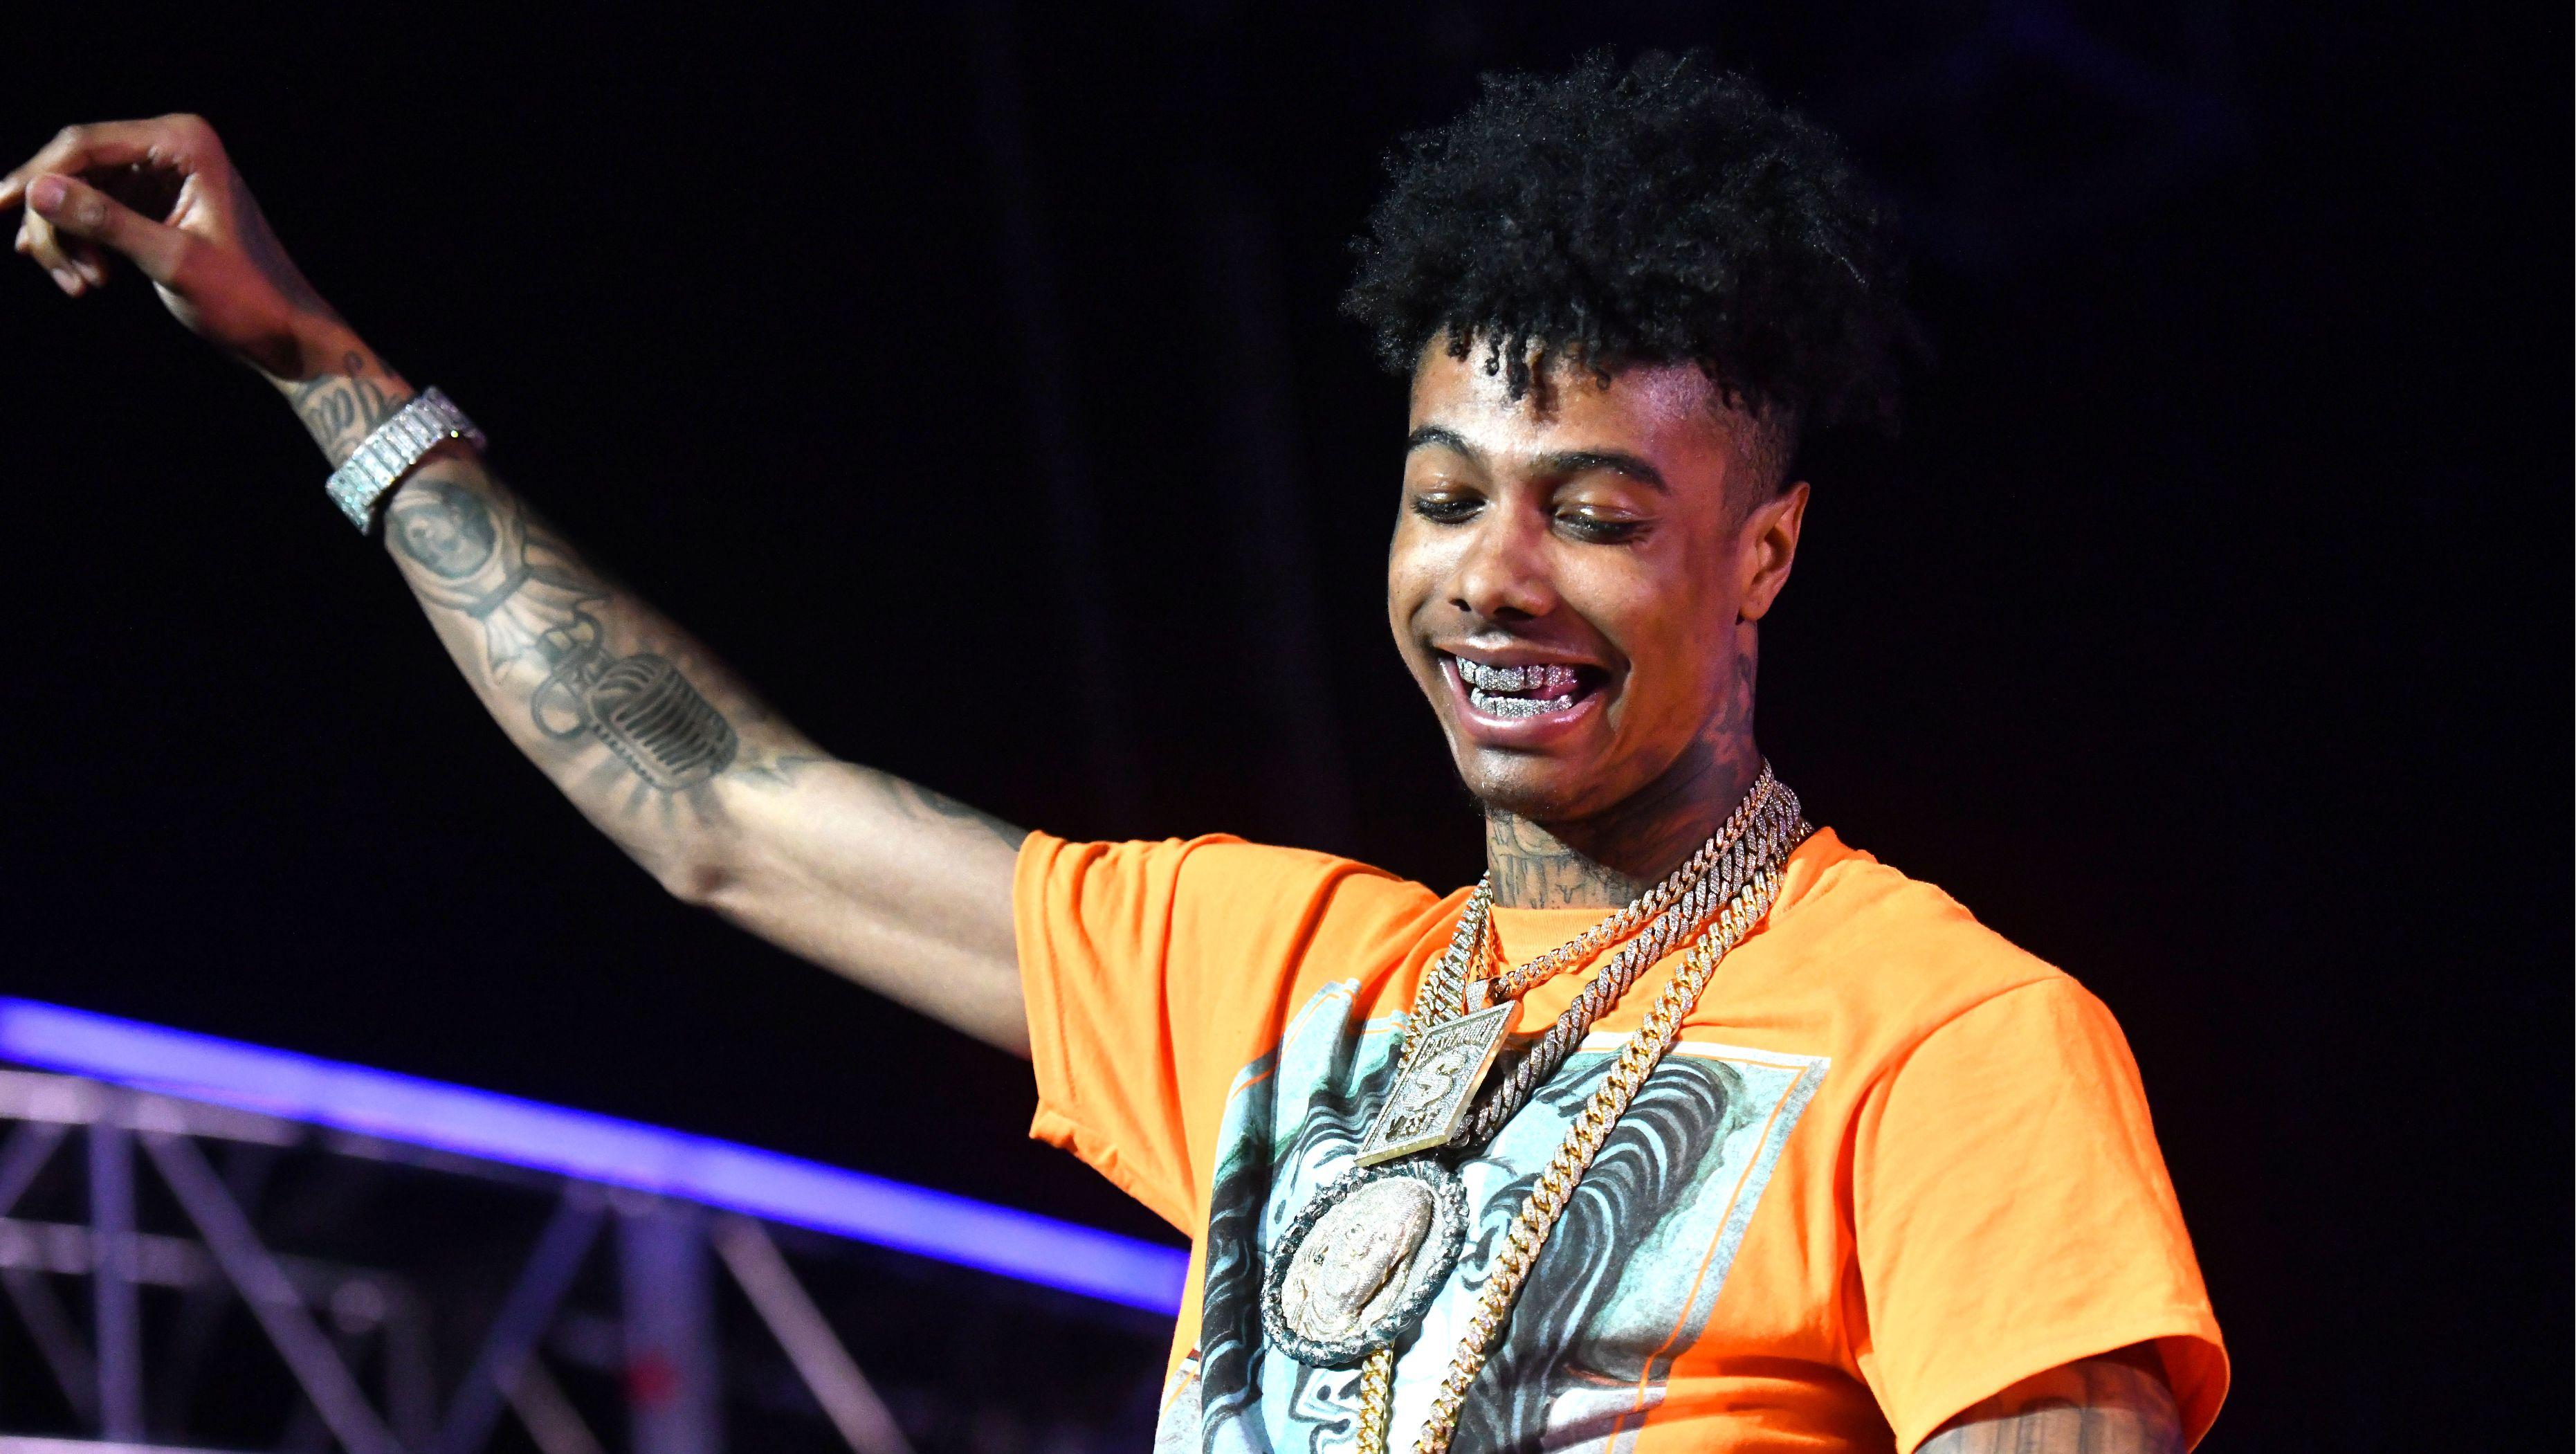 Blueface The Rapper Wallpapers - Wallpaper Cave